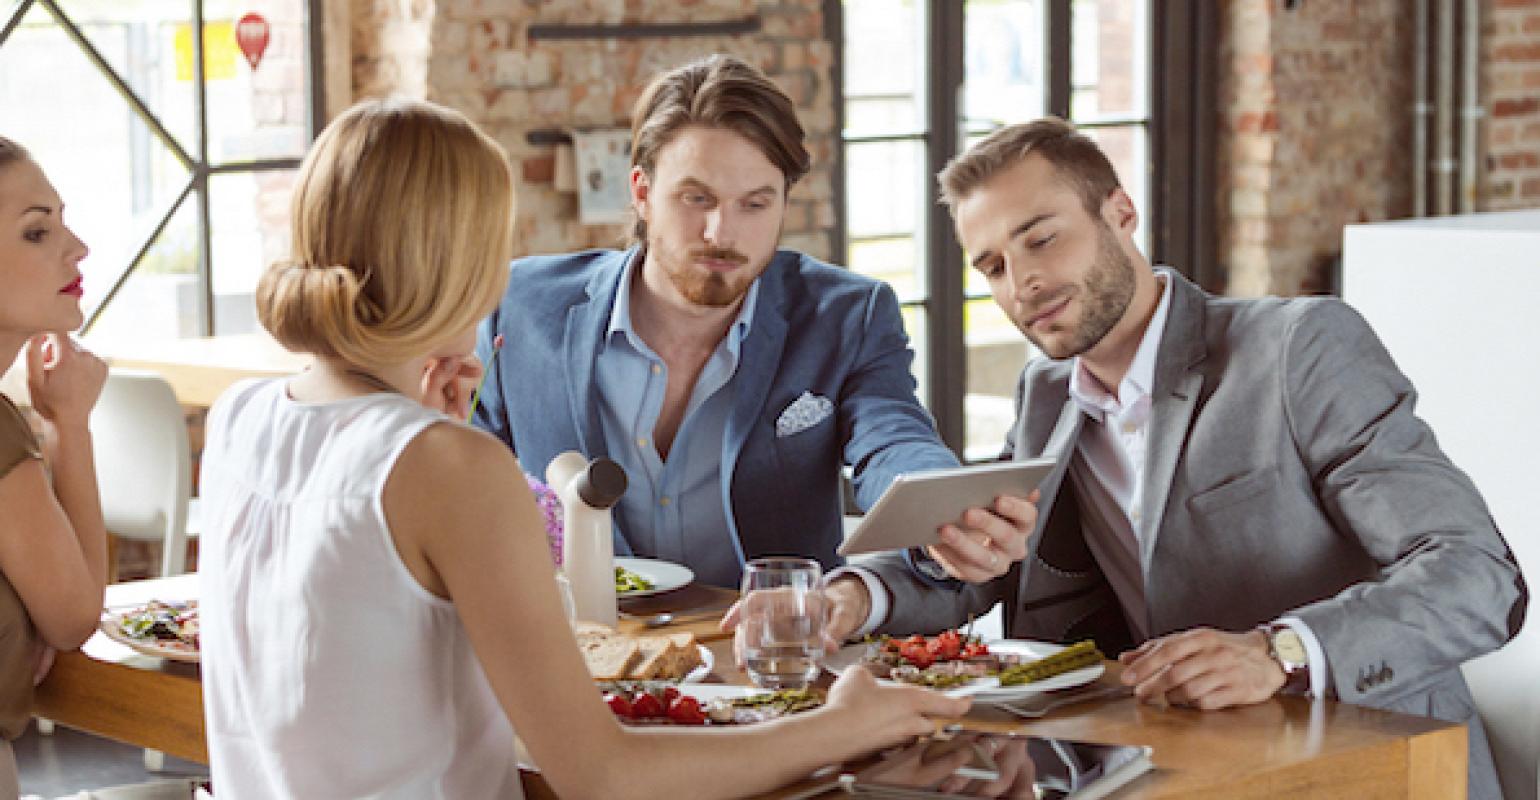 For business meetings, breakfast is the new lunch | Nation's Restaurant